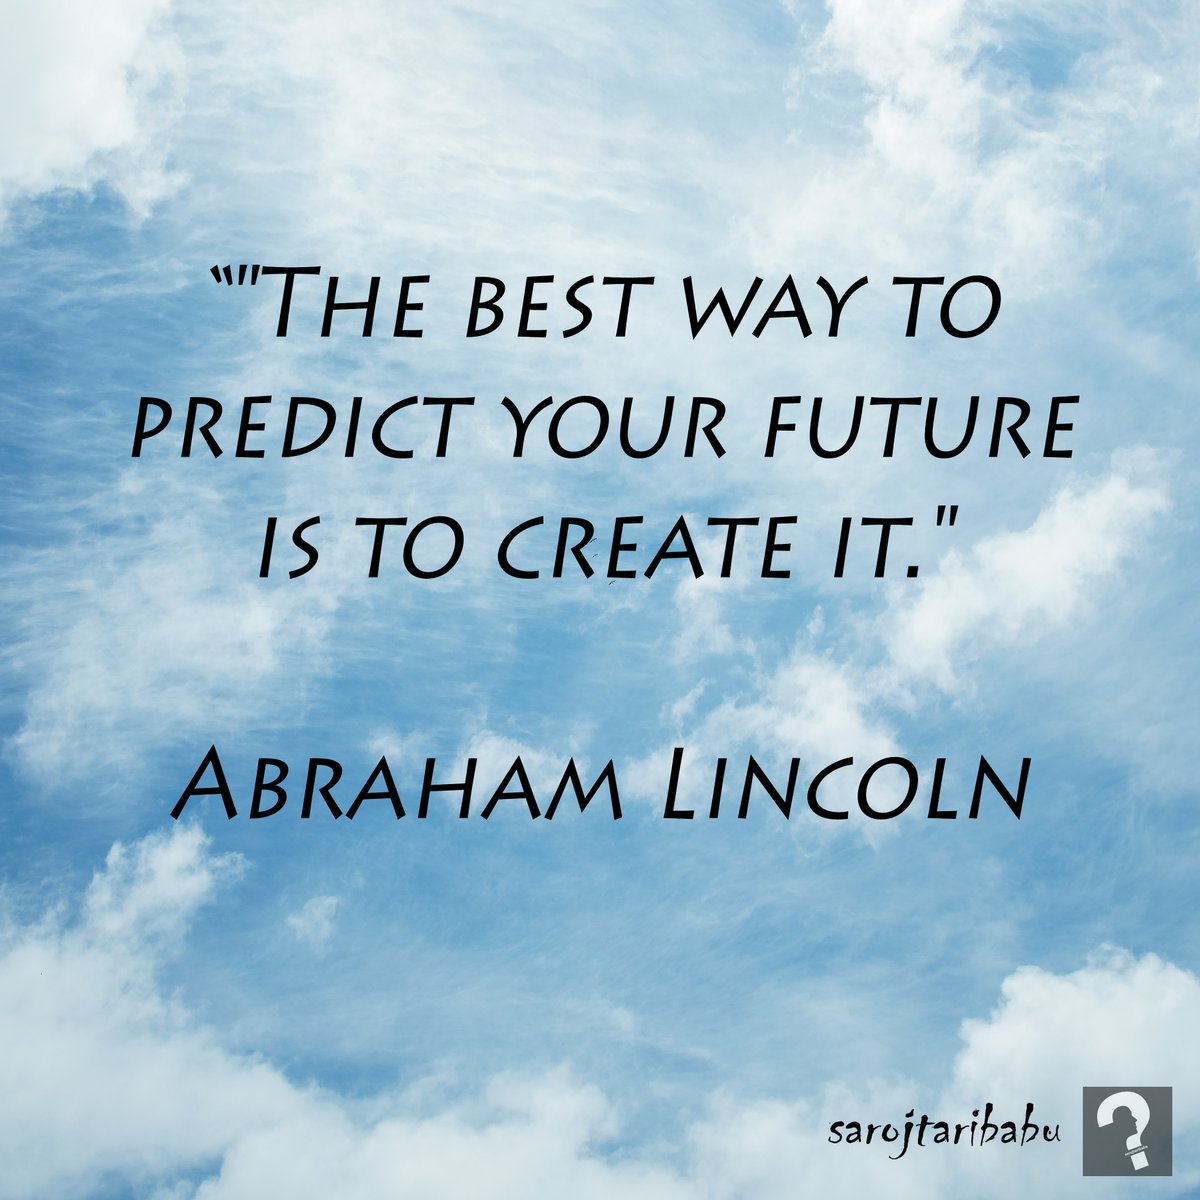 Quotes of the week: 'The best way to predict your future is to create it.' - Abraham Lincoln

#quoteoftheday #quotesoftheweek #quotesaboutlife #quotestolive #quotestoinspire #quotesforsuccess #twitterquote #quotes_quotes #sarojtaribabu #sarojtaribabuofficial